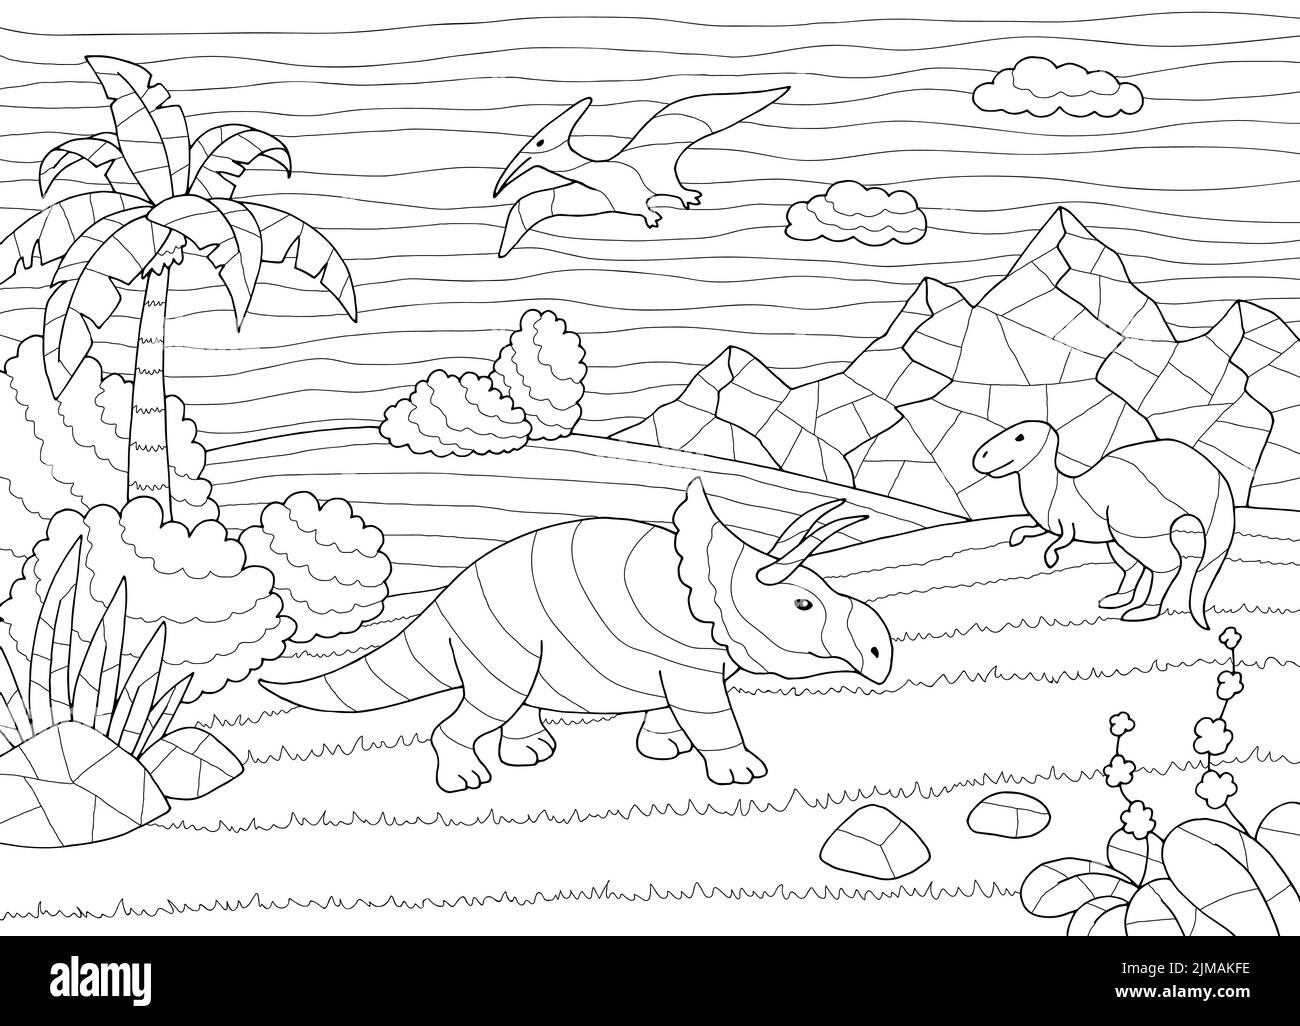 Mowgli and friends the jungle book coloring pages | Free disney coloring  pages, Disney coloring pages, Coloring pages